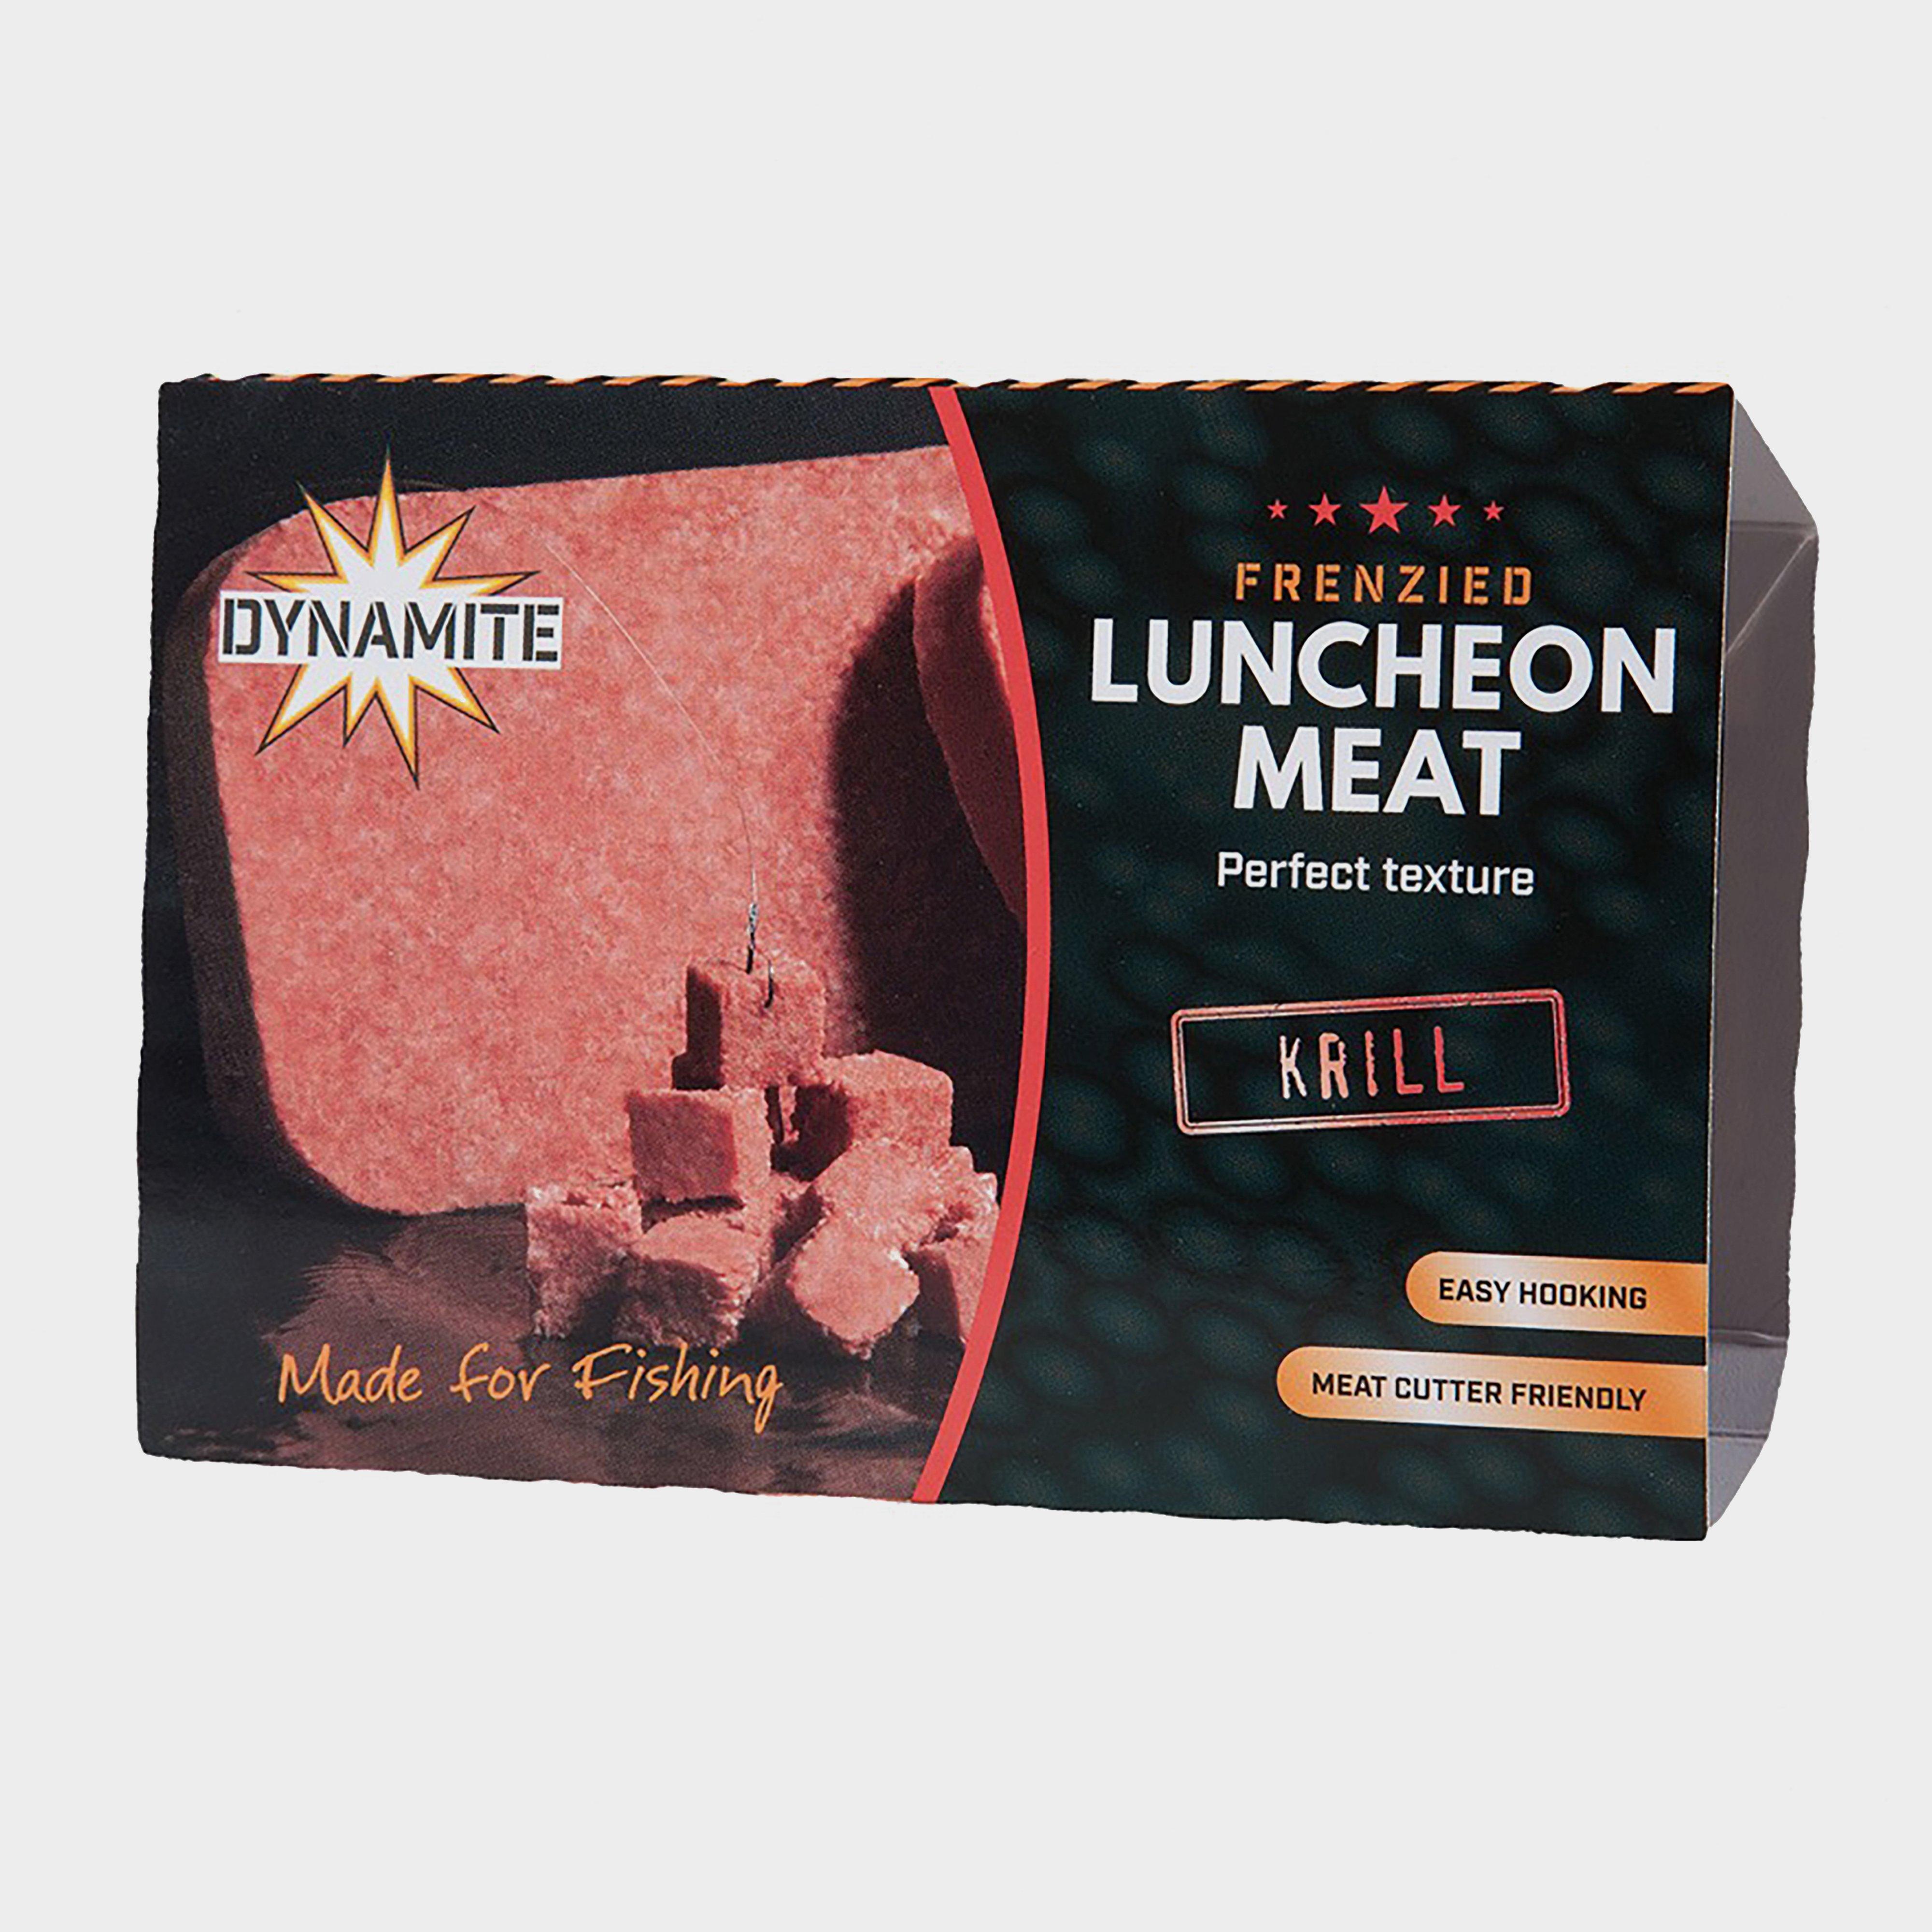 Dynamite Frenzied Krill Luncheon Meat - Lunche/lunche  Lunche/lunche